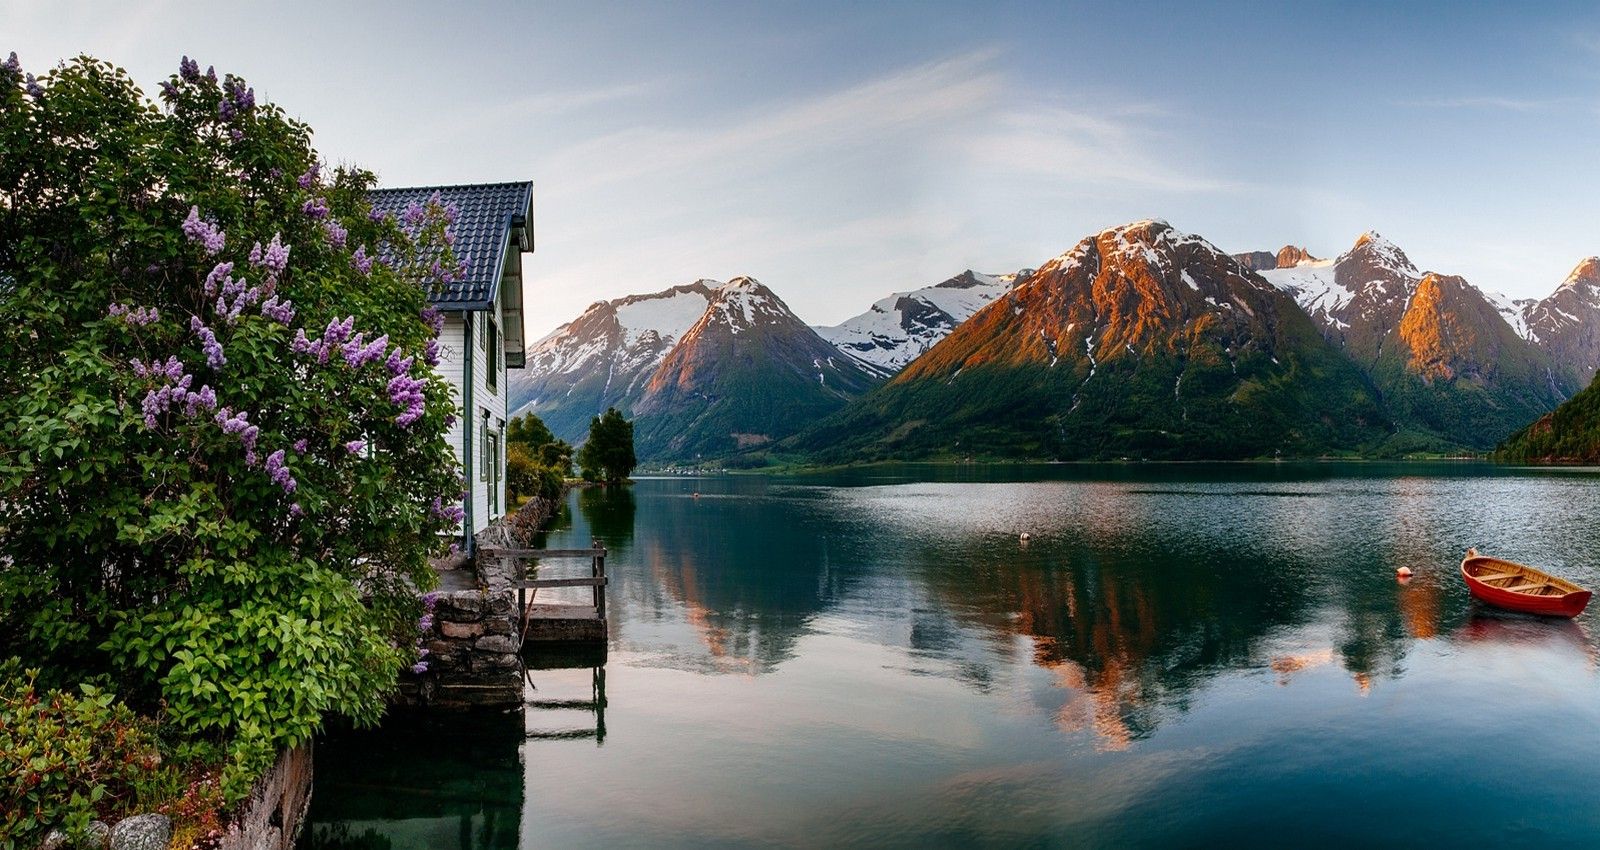 spring, Sunrise, Fjord, Norway, Mountain, House, Flowers, Snowy Peak, Boat, Sea, Reflection, Nature, Landscape Wallpaper HD / Desktop and Mobile Background